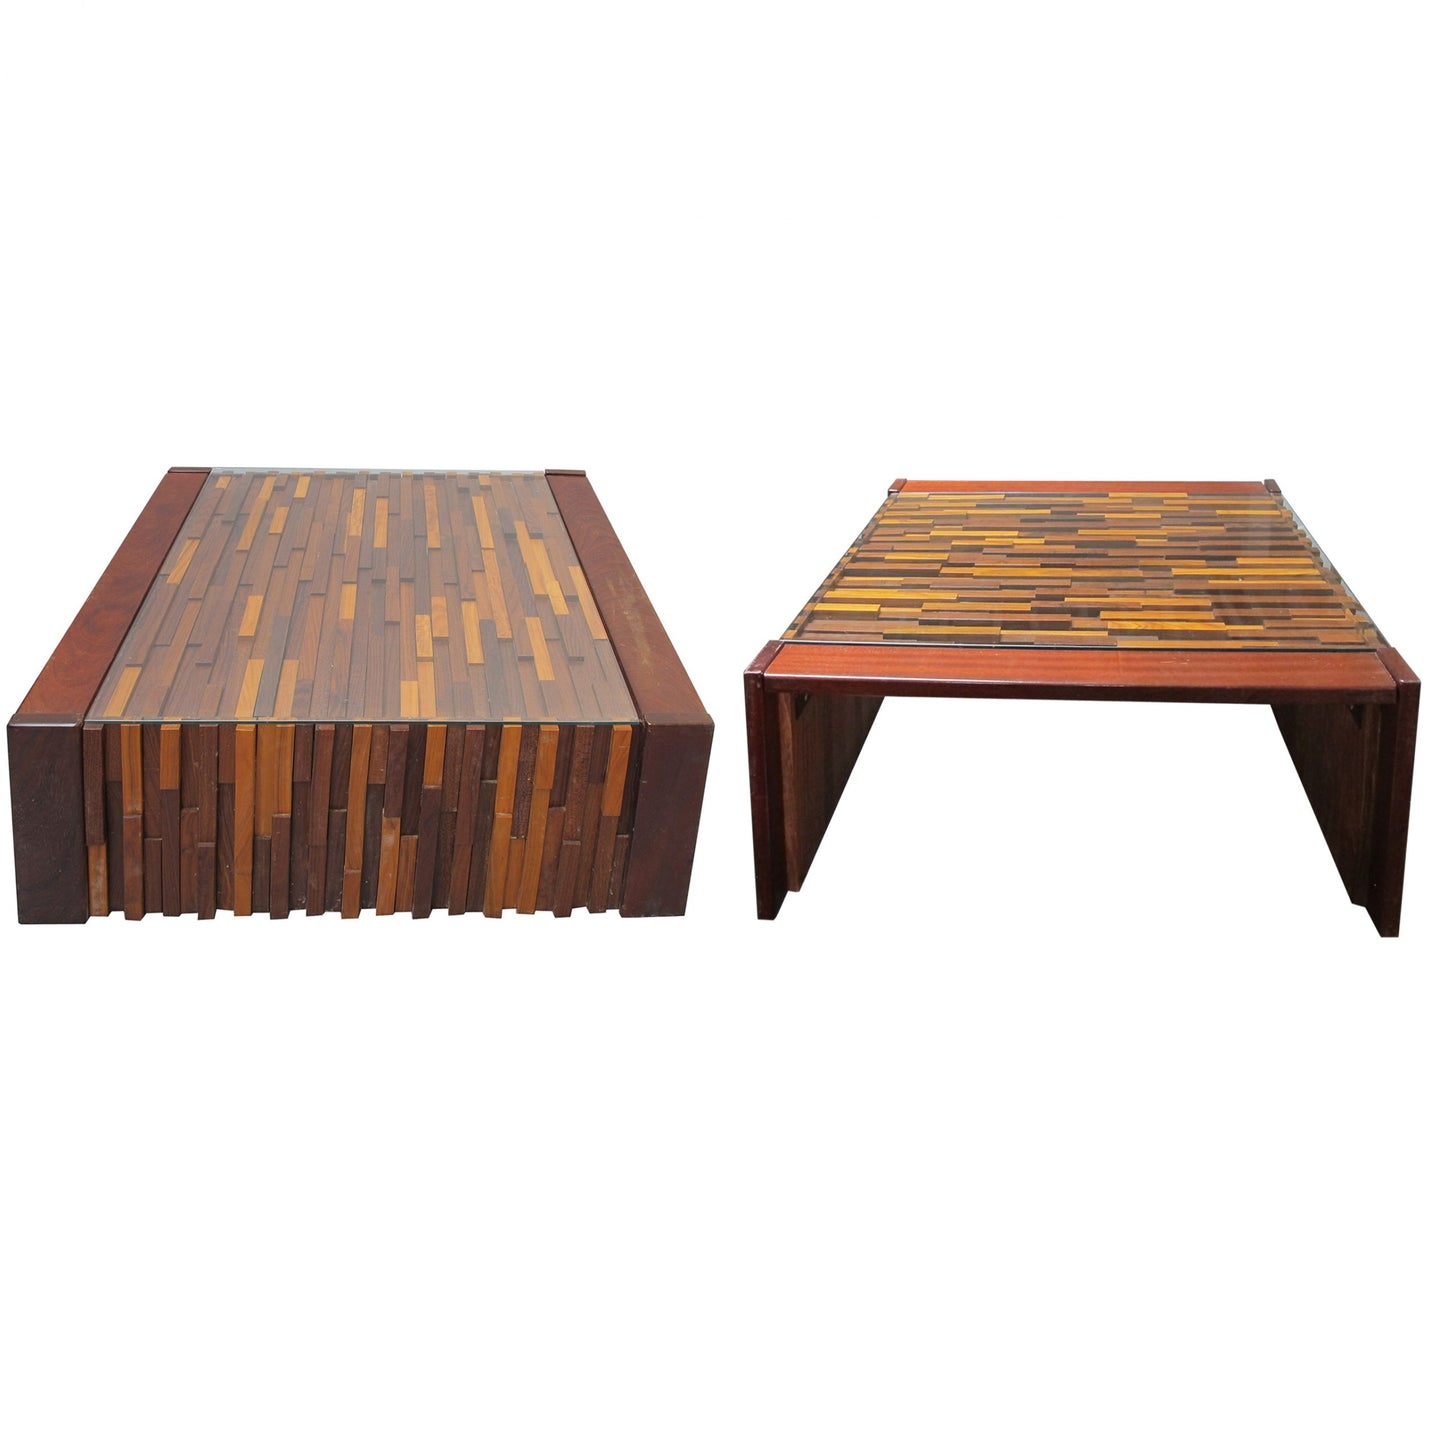 Jacaranda wood side tables by Parcival Lafer with folding mechanism